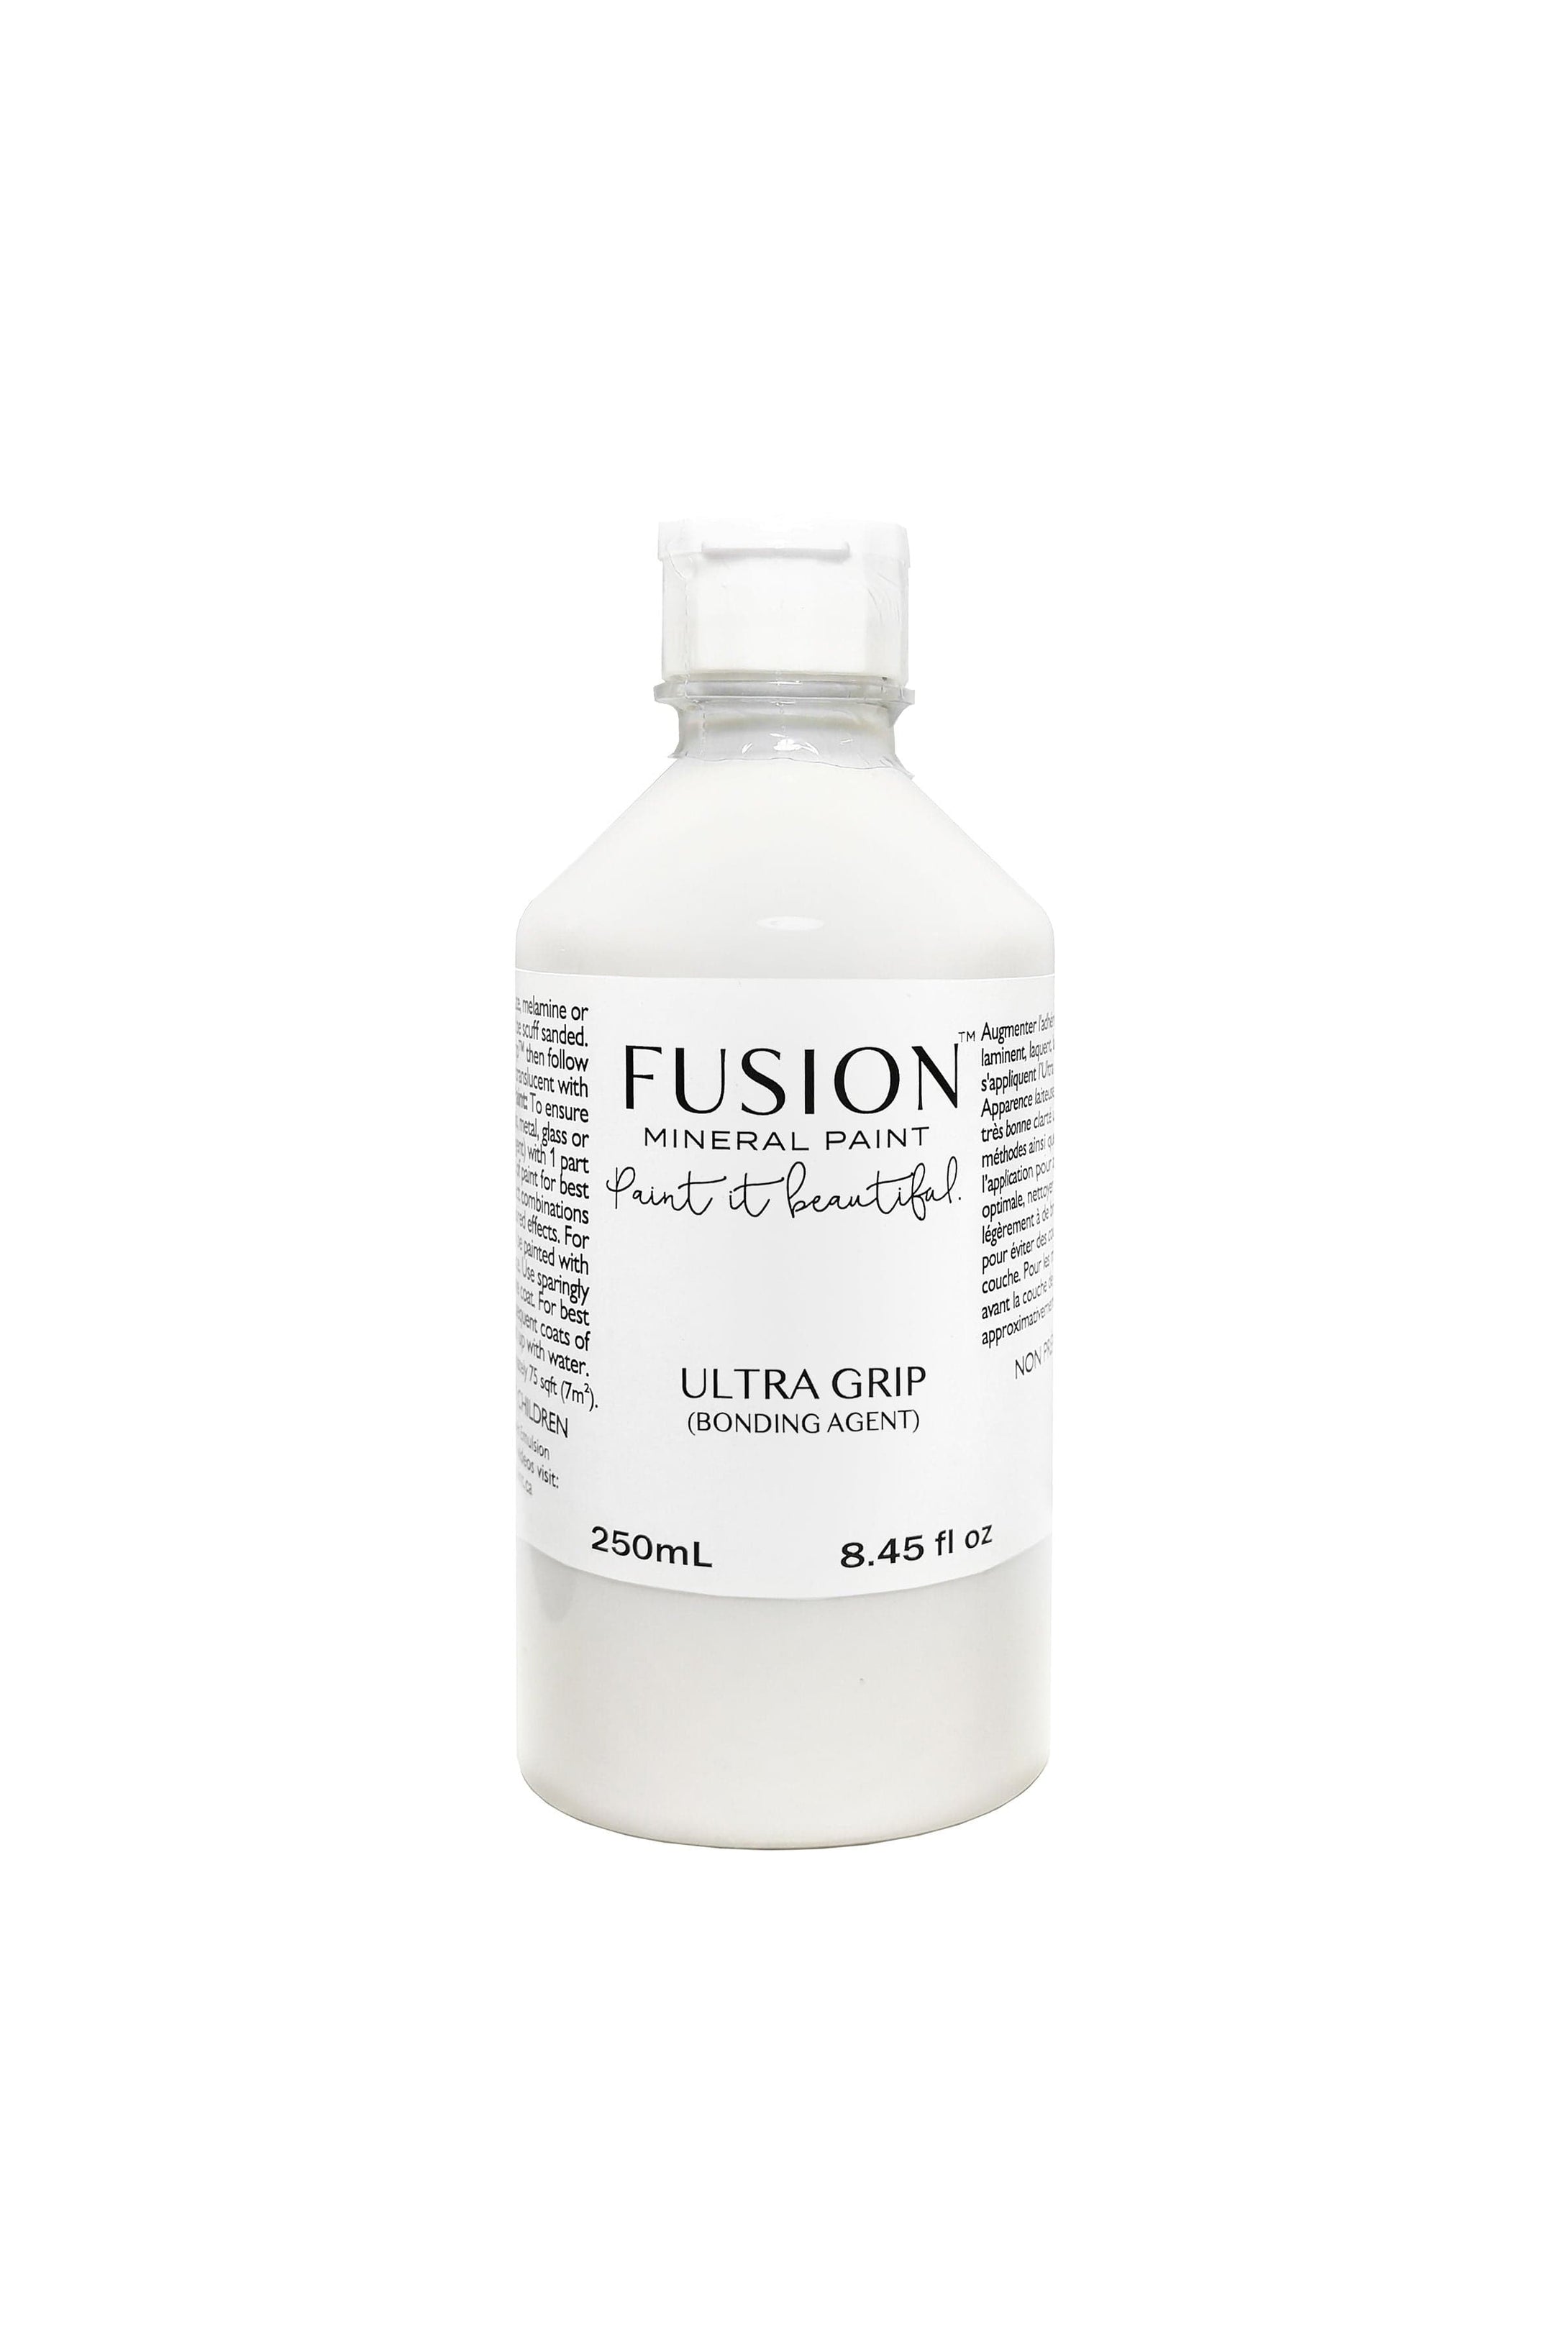 Fusion Fusion Mineral Paint 250 ml Fusion Ultra Grip Bonding Agent